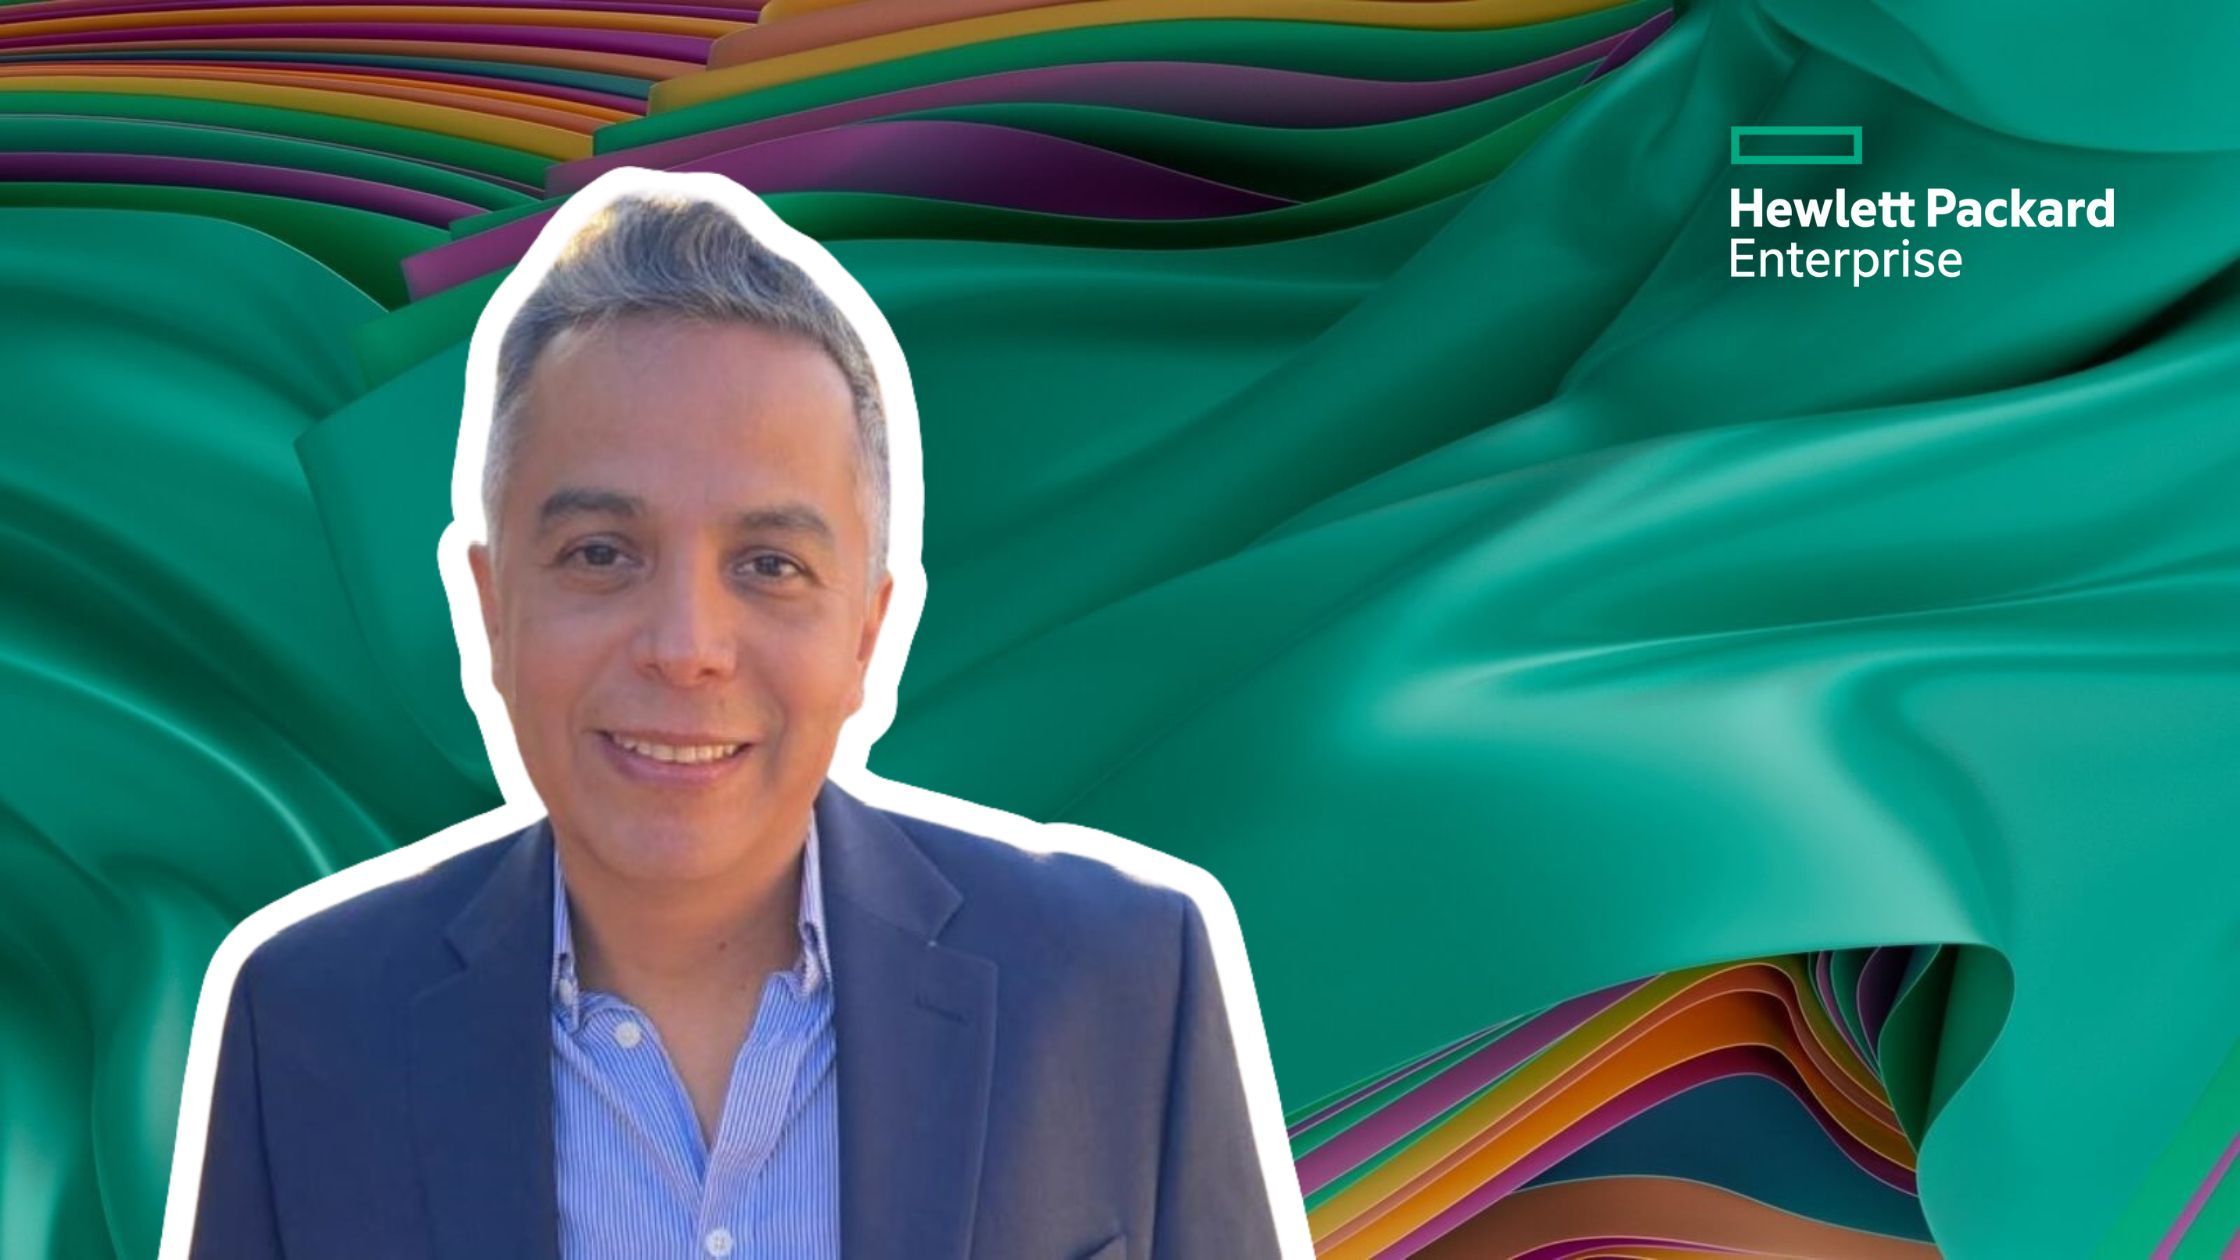 Carlos Camarillo was part of the first cohort to complete the HPE Cybersecurity Career Reboot Program.